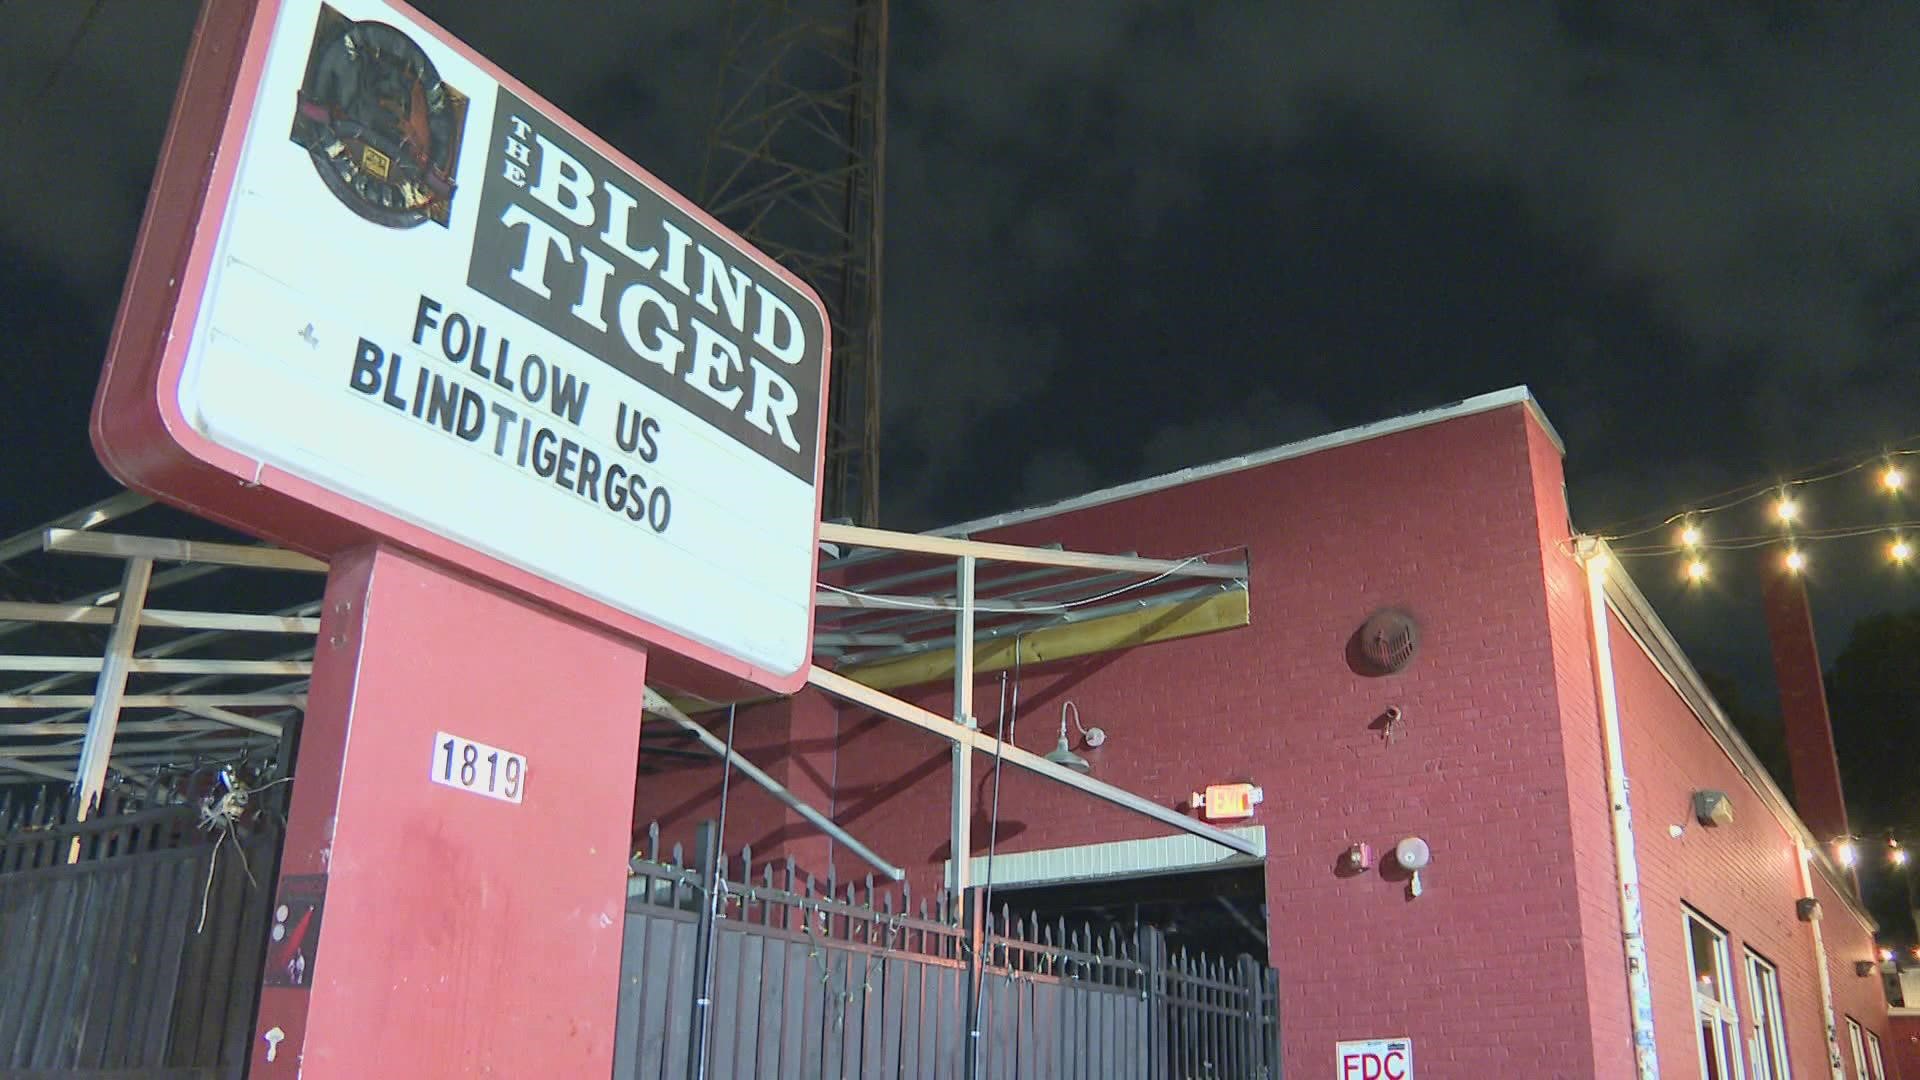 The owner of the Blind Tiger in Greensboro, as well as three employees, face charges days after a deadly shooting in their parking lot.